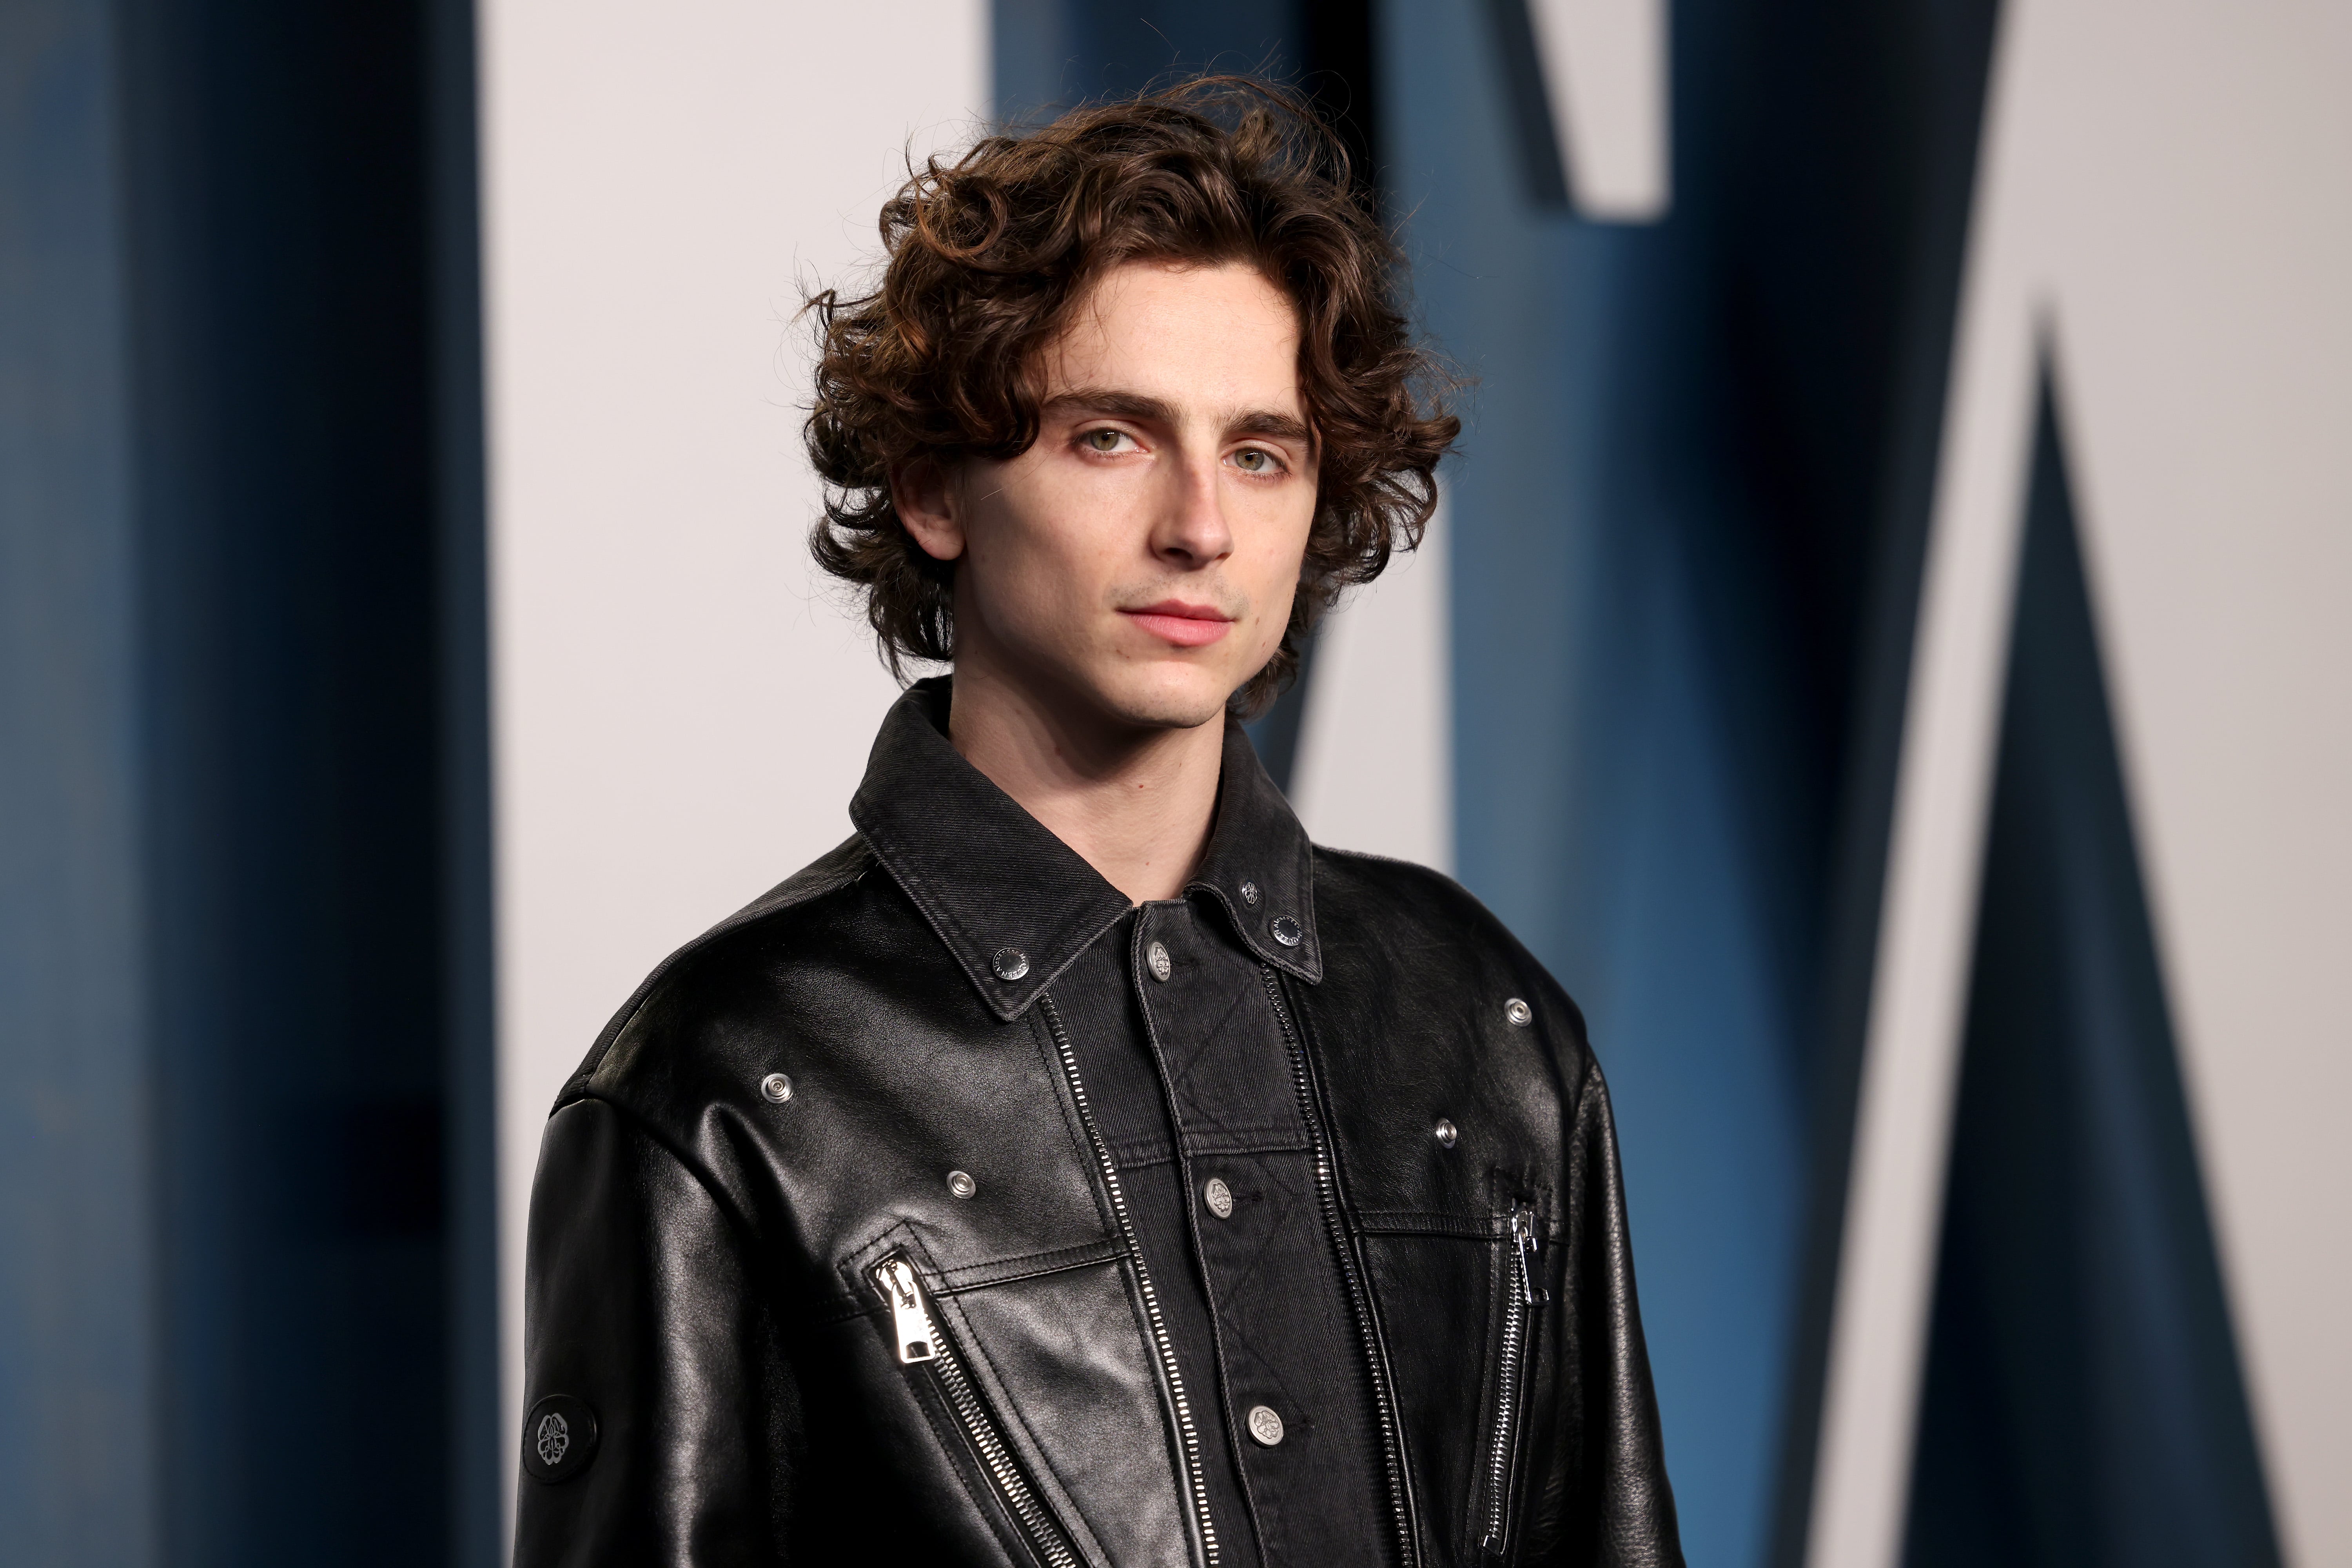 Timothée Chalamet's Biker Outfit at the Oscars Afterparty